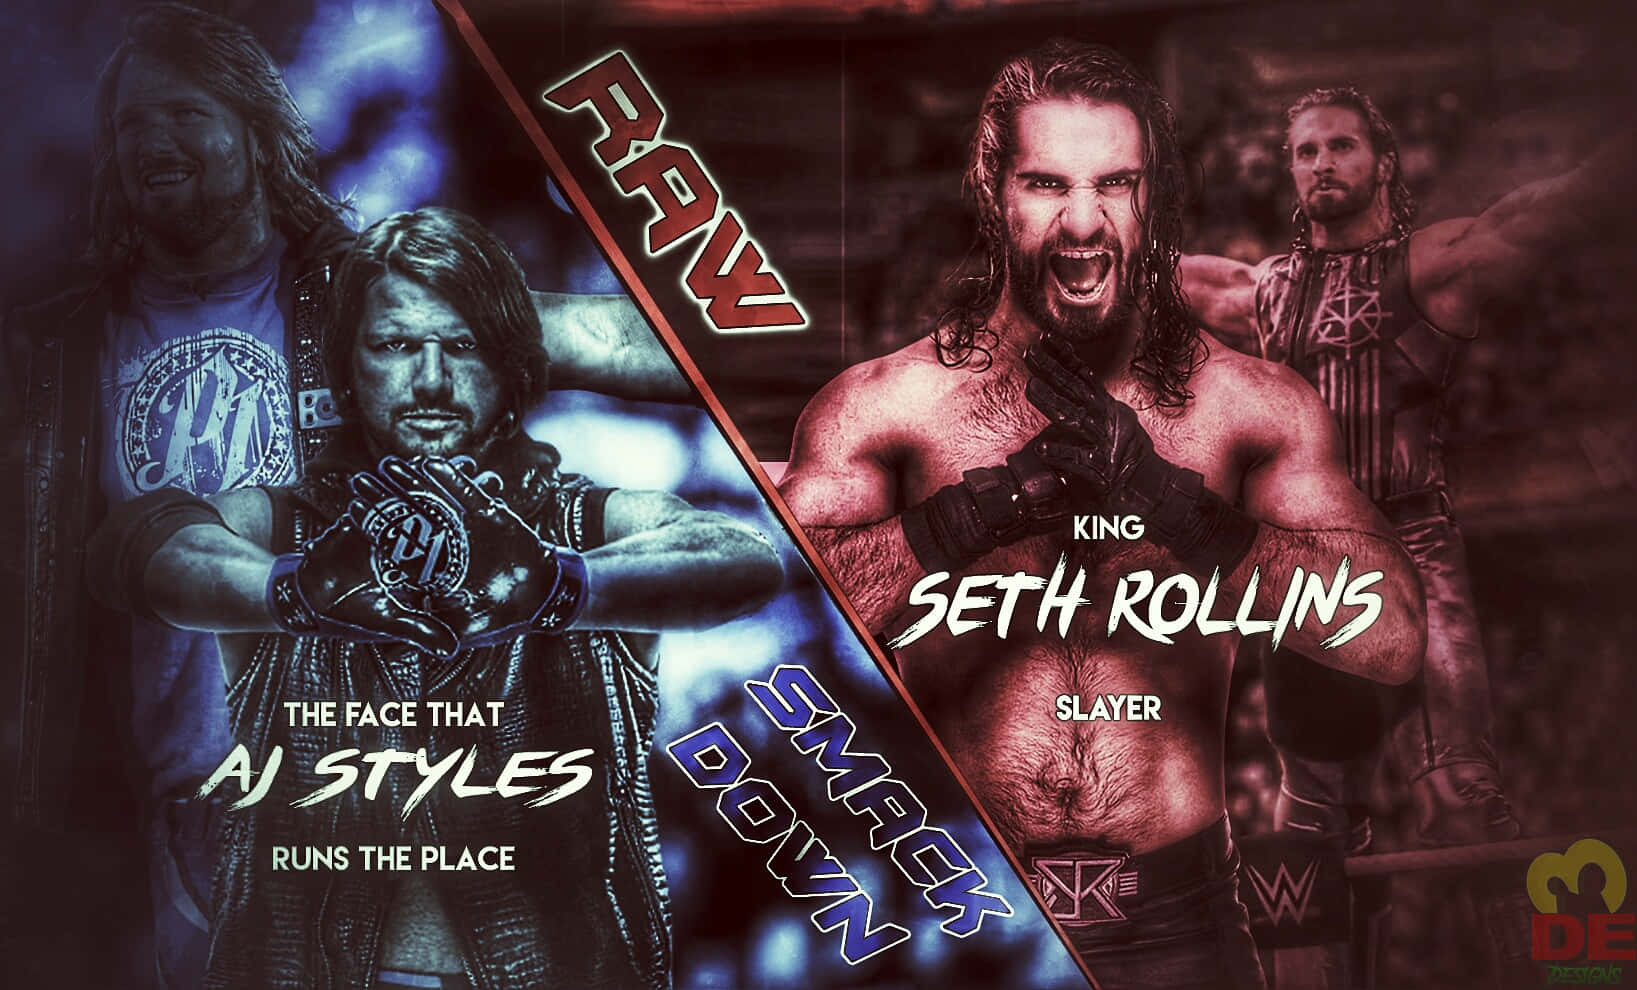 AJ Styles And Seth Rollins Smack Down Wallpaper